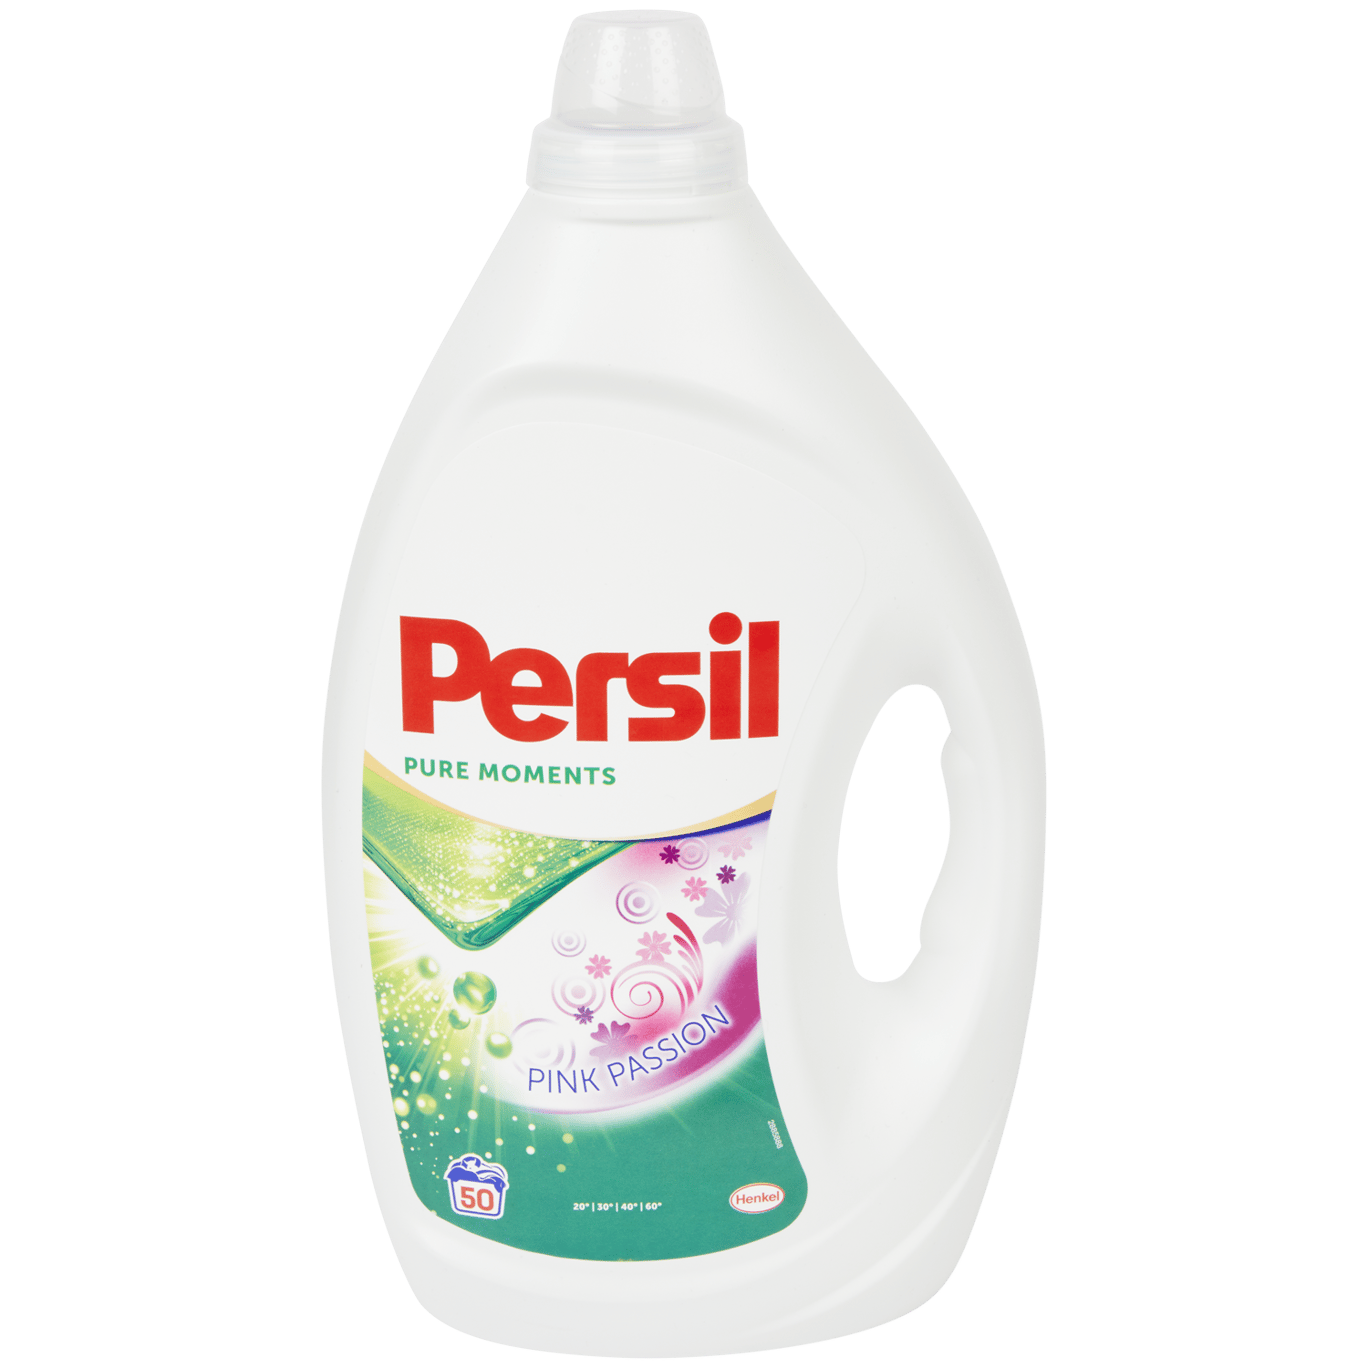 Lessive Persil Pure Moments Pink Passion